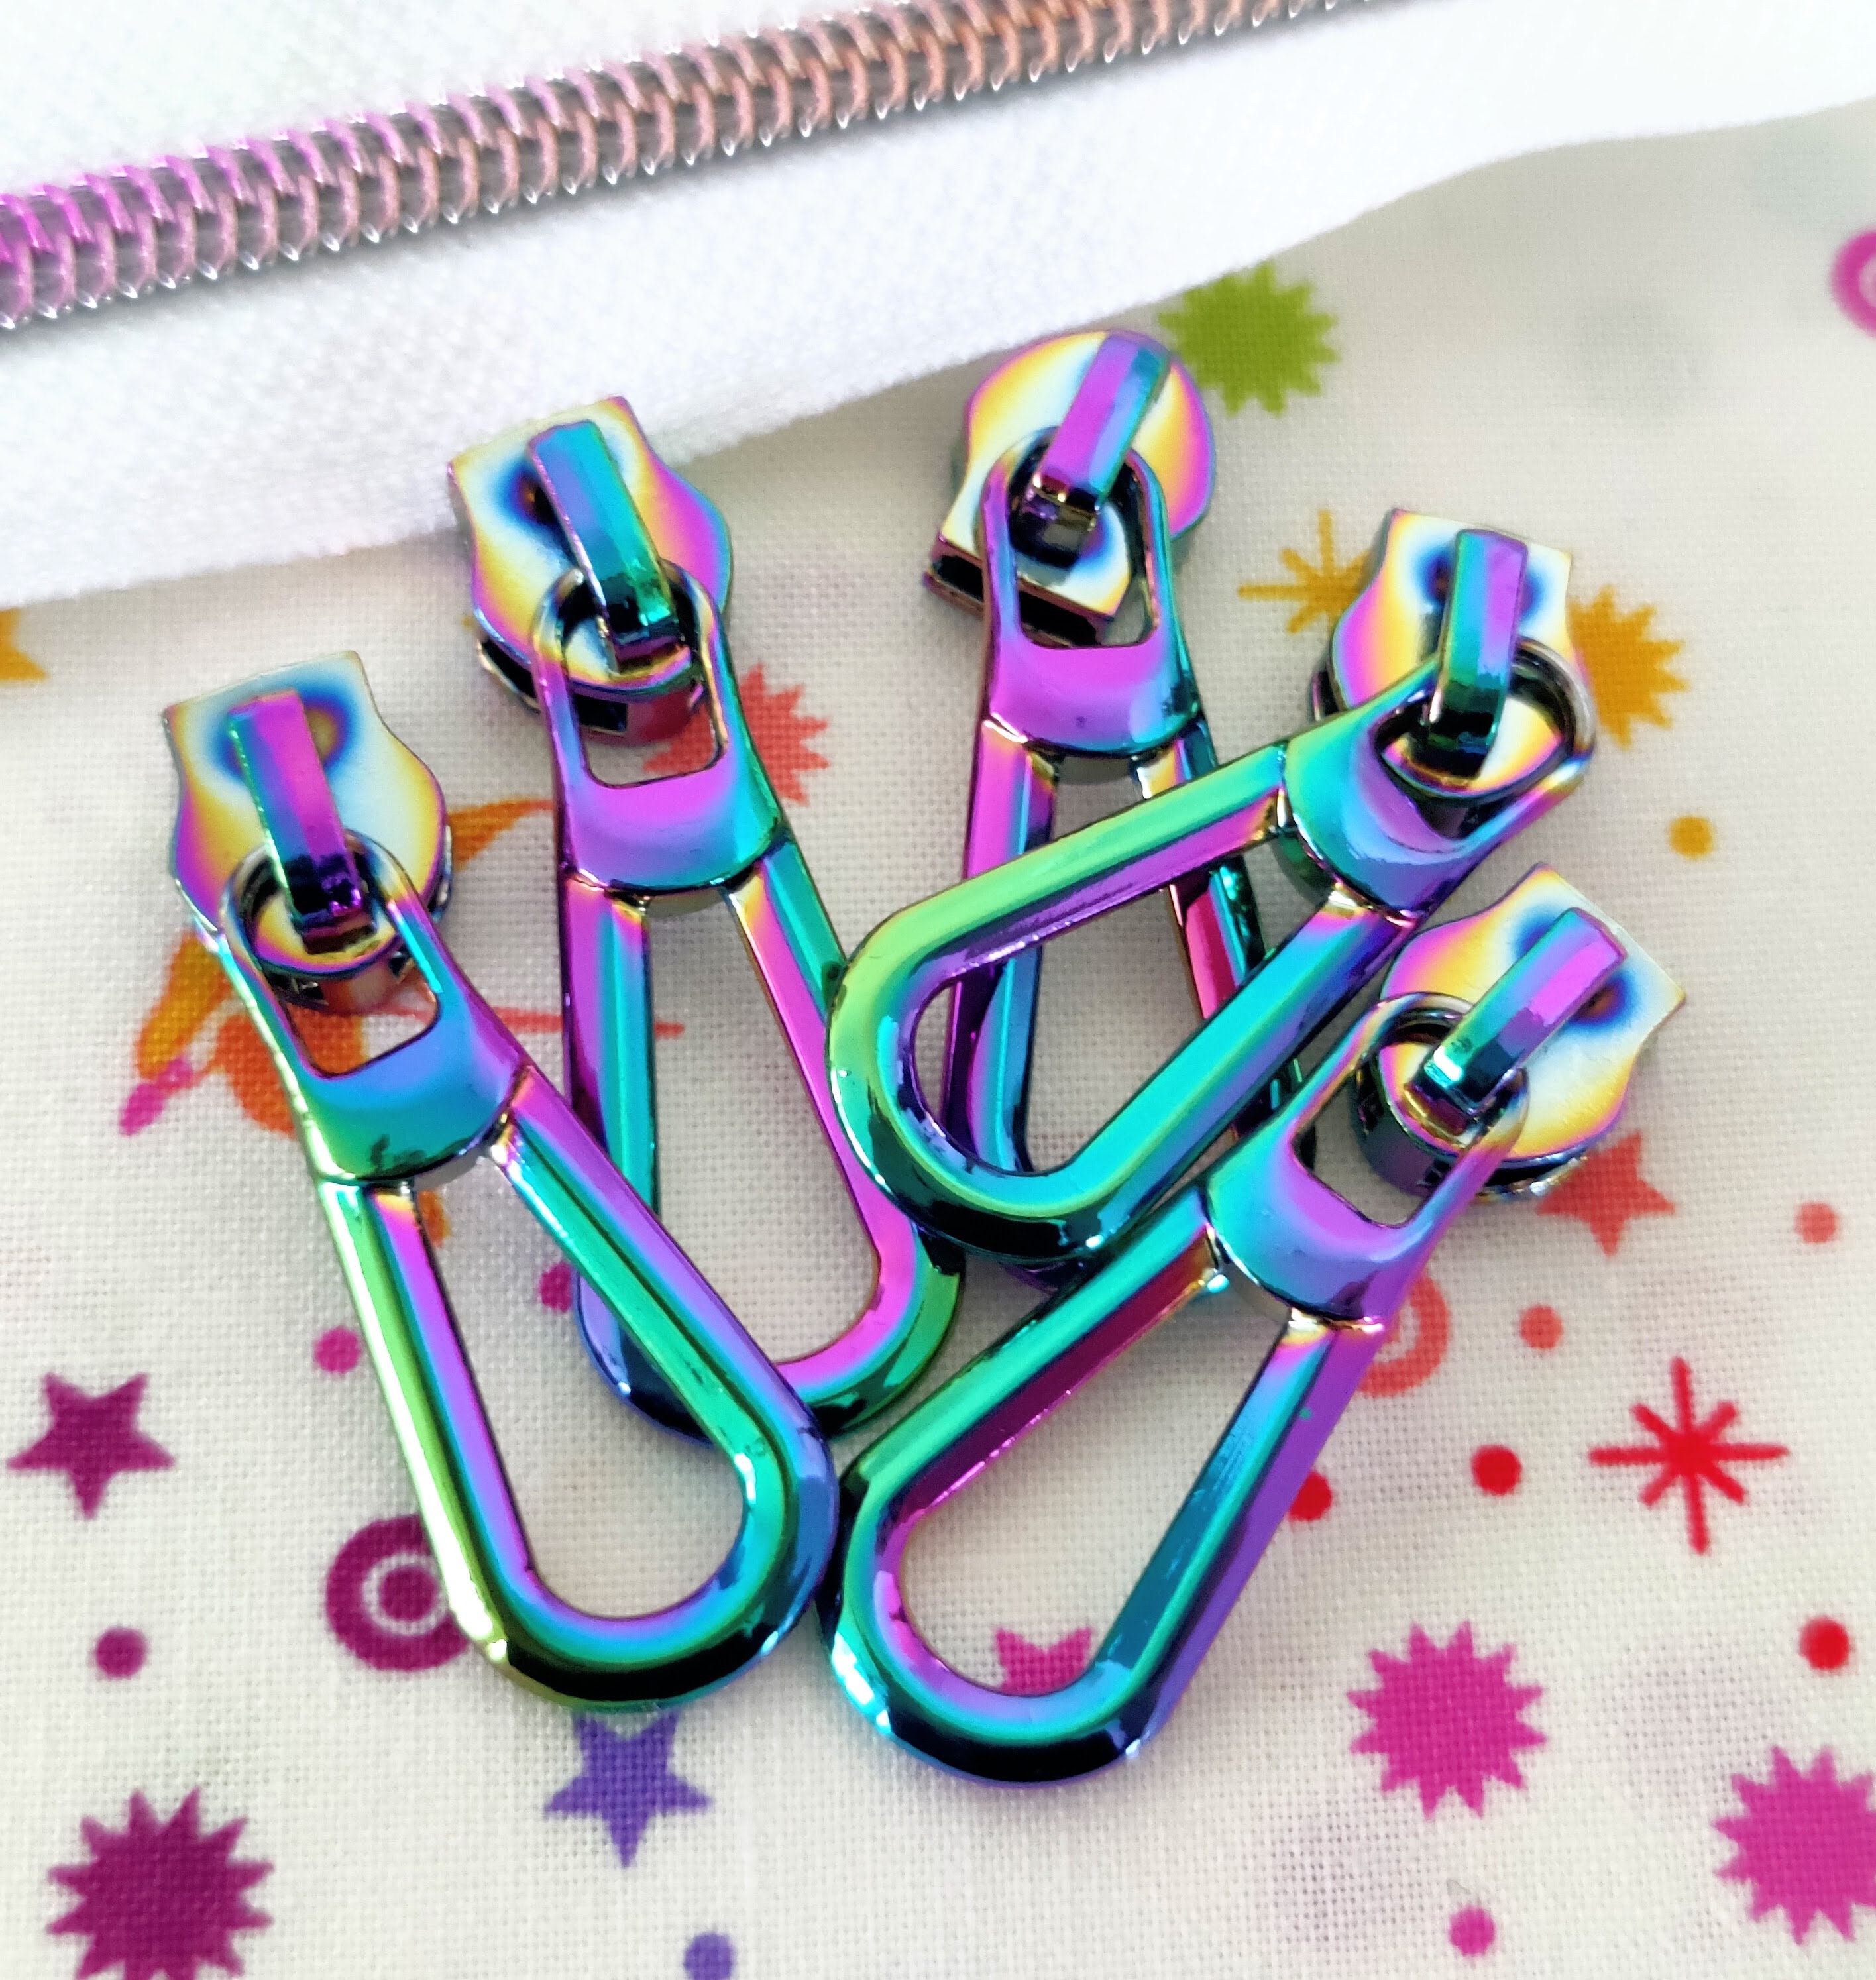 Zipper Pull Charms - Quilter Maker Sewist - Set of 3 - 752106754386